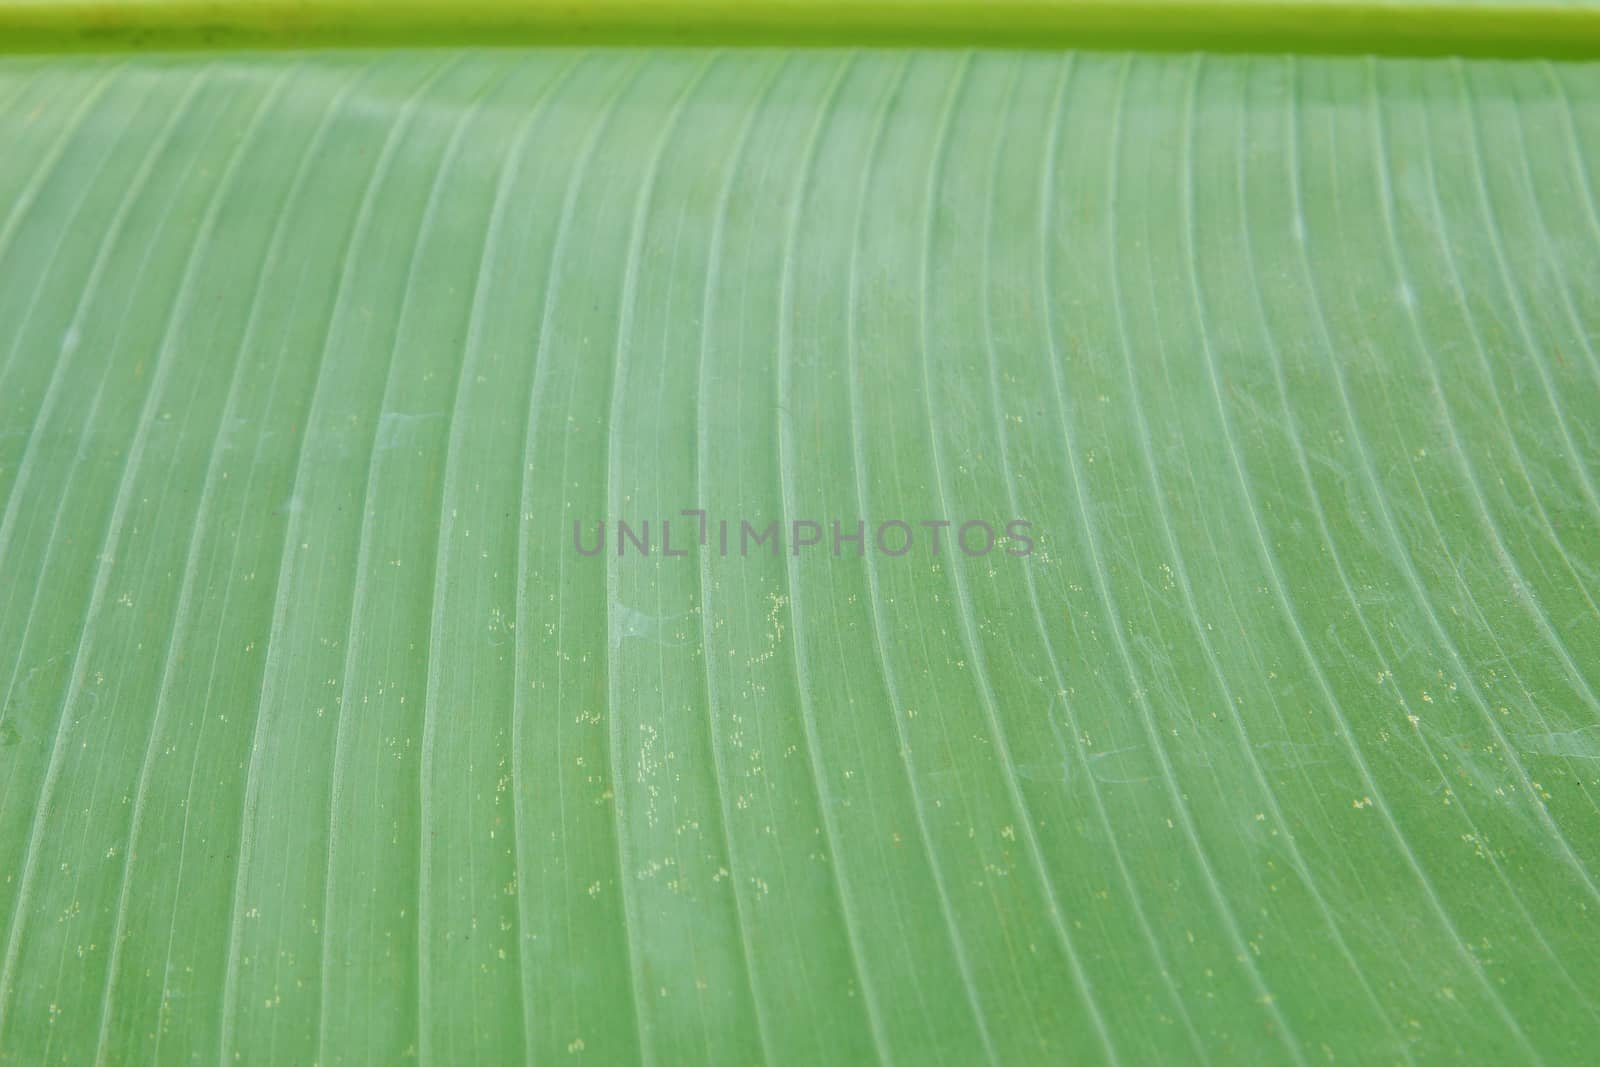 Banana leaf background with lines by foto76